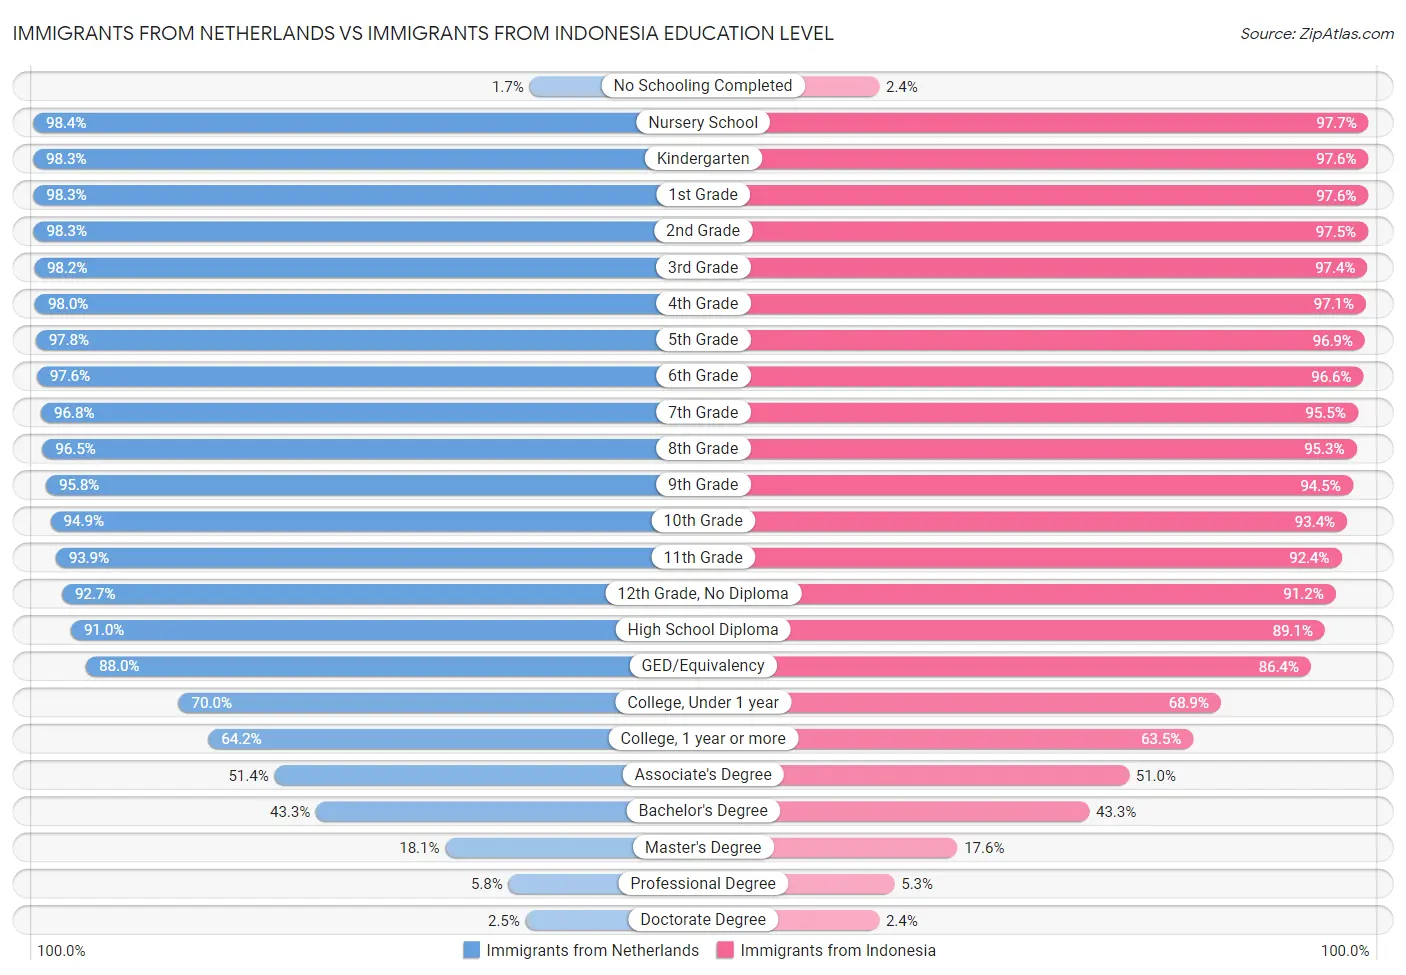 Immigrants from Netherlands vs Immigrants from Indonesia Education Level